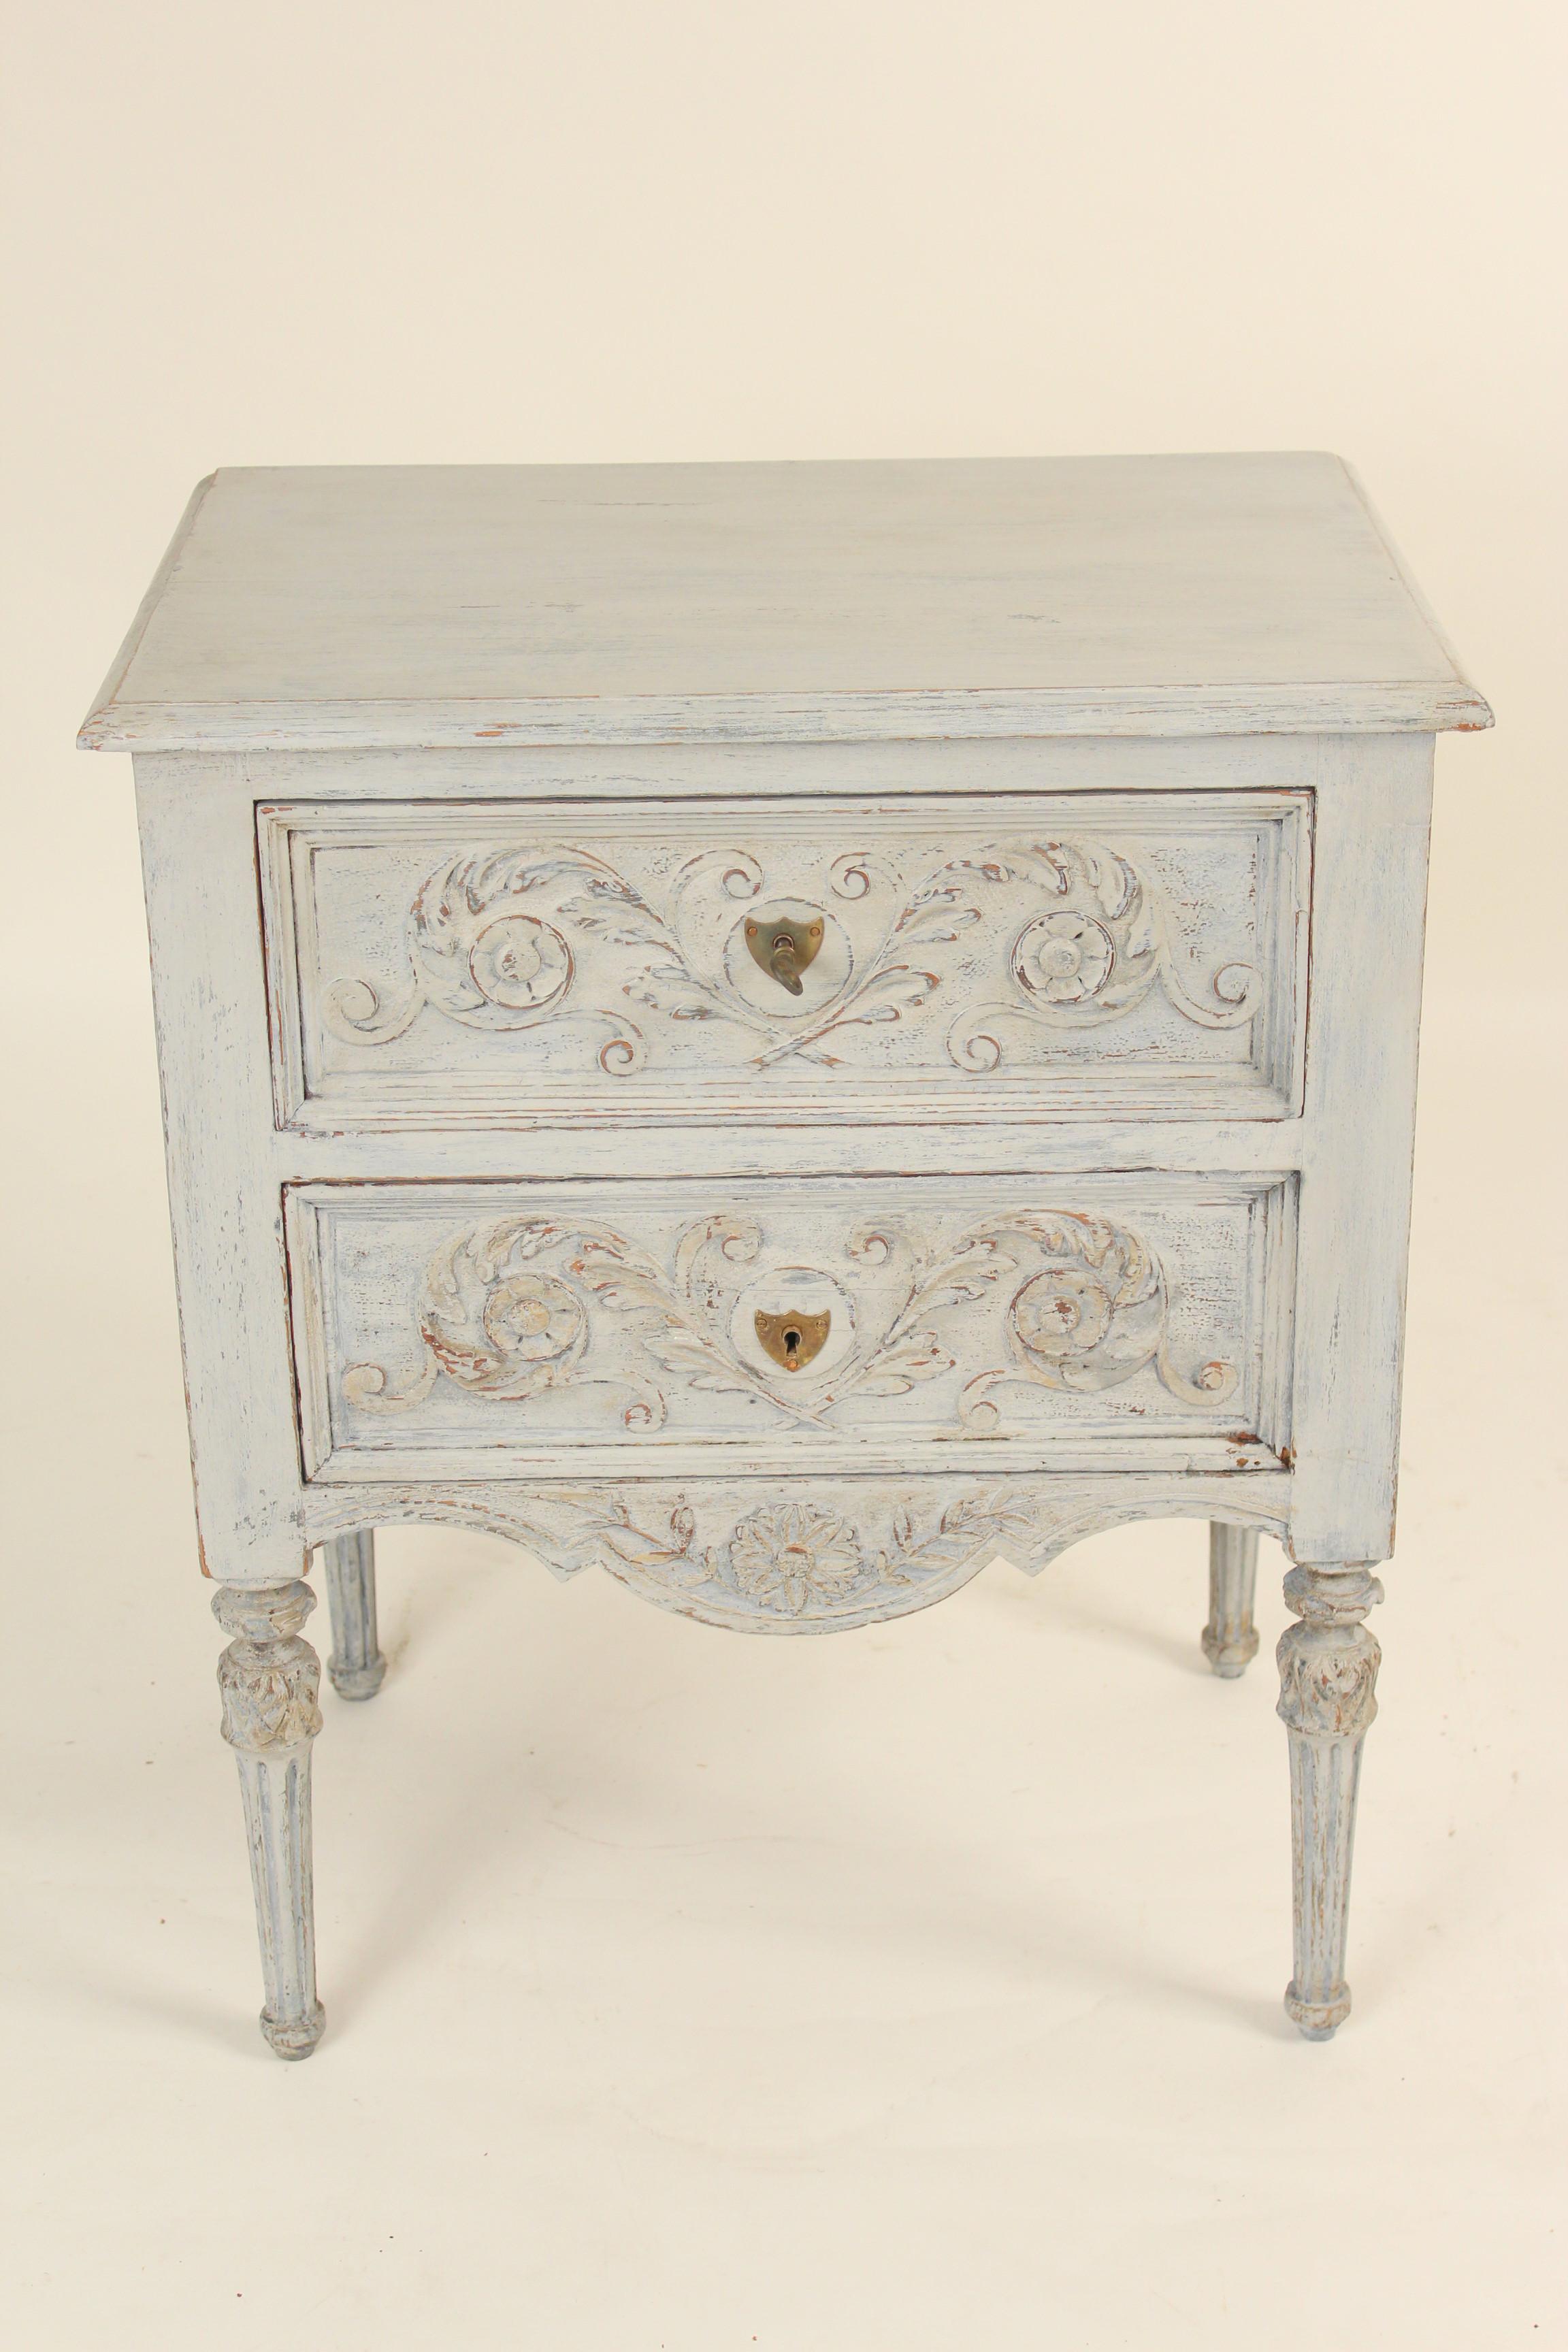 Louis XVI style painted small scale chest of drawers / occasional table, circa 1930s. Hand dovetailed drawer construction. This chest has a top drawer and a bottom door. The paint is later.